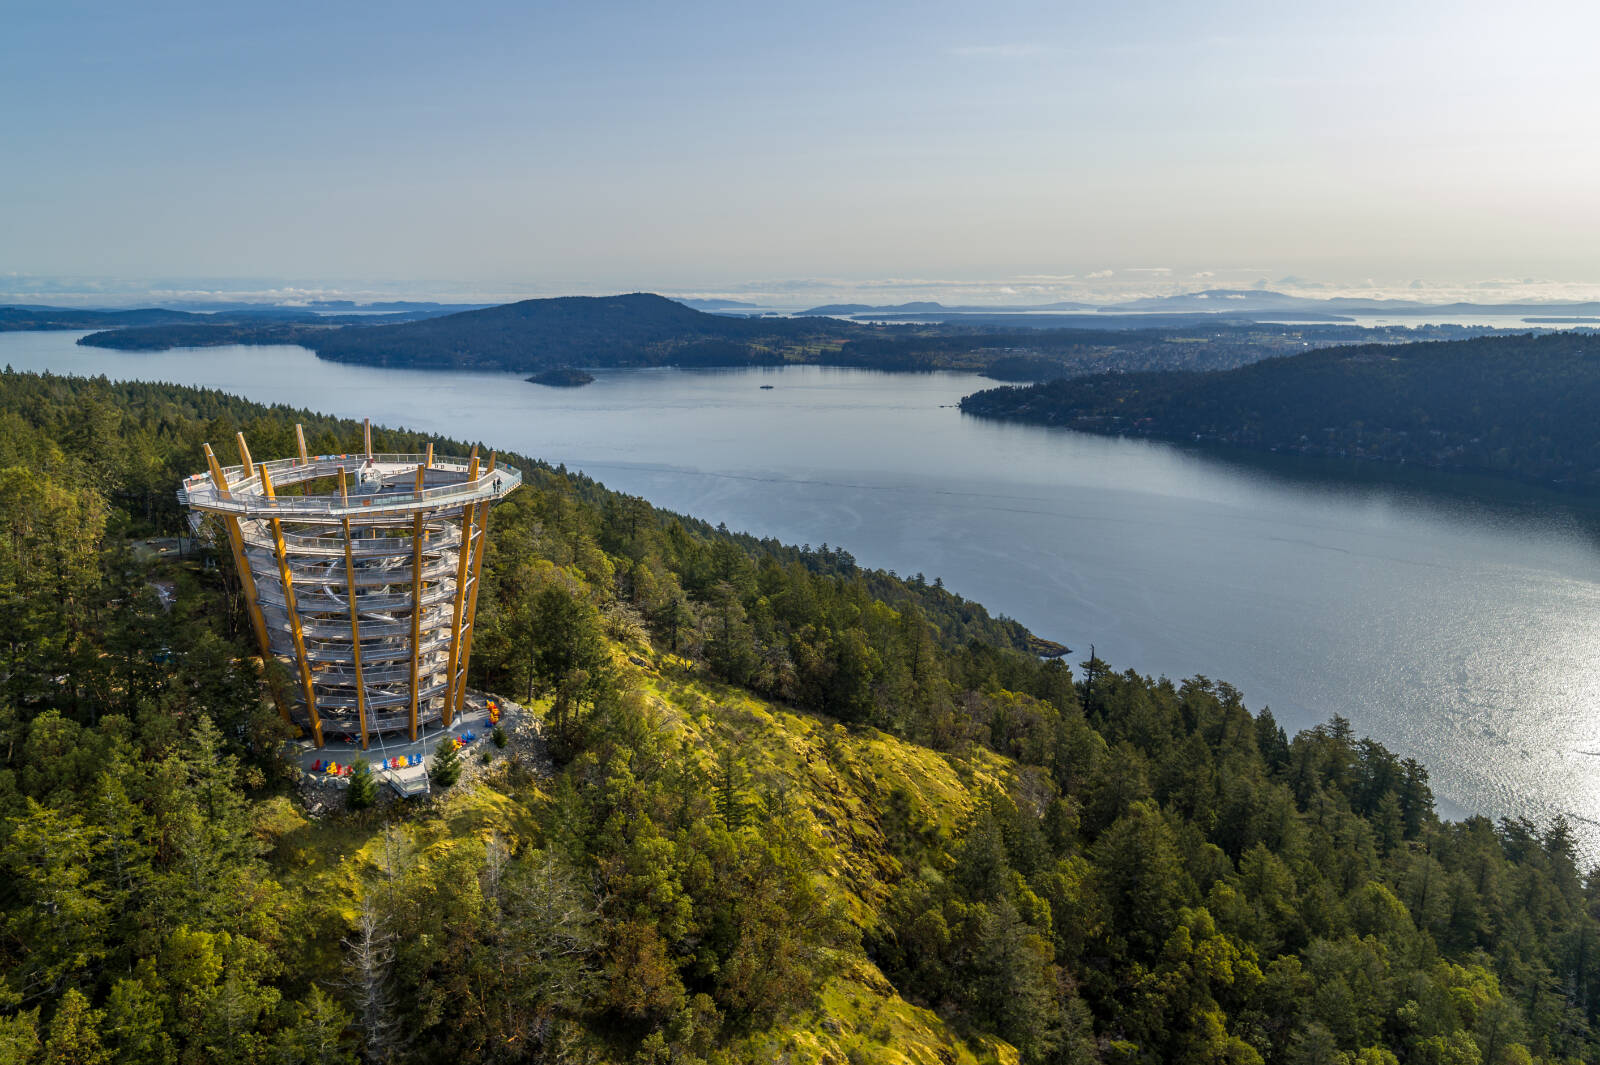 One of the spots highlighted on the Spirit Loop tour is the Malahat Skywalk, which opened last year on the Malahat. Photo courtesy the Malahat Skywalk